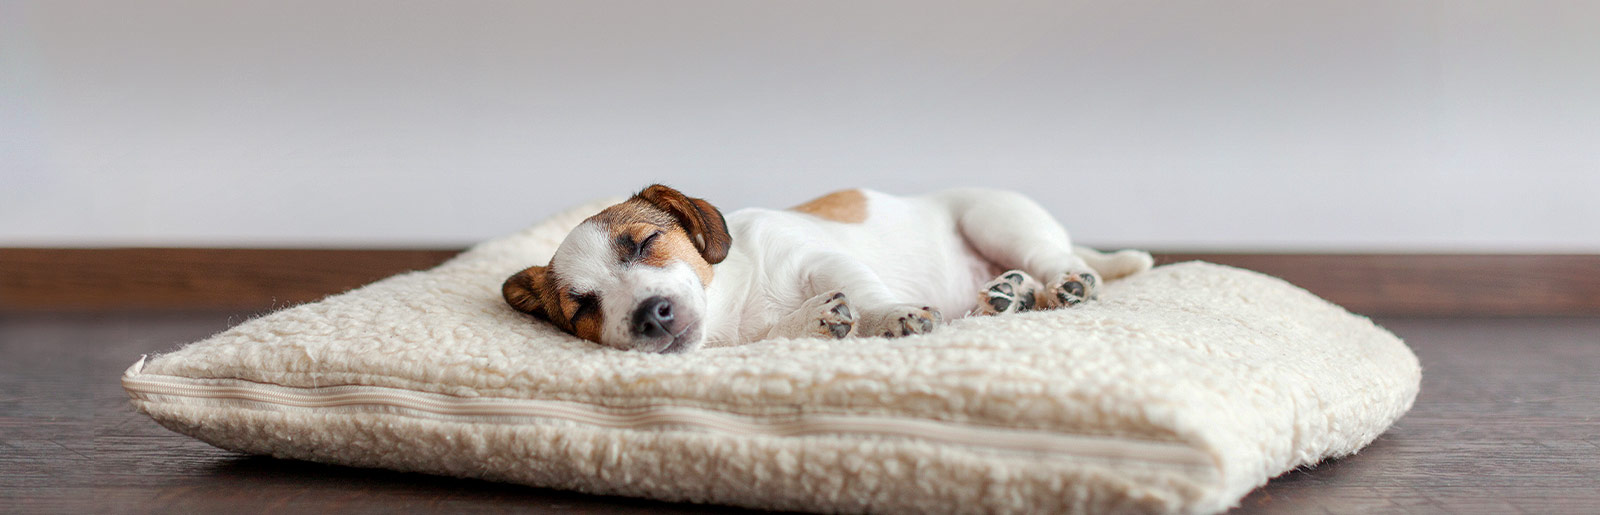 How many hours do dogs sleep per day? 